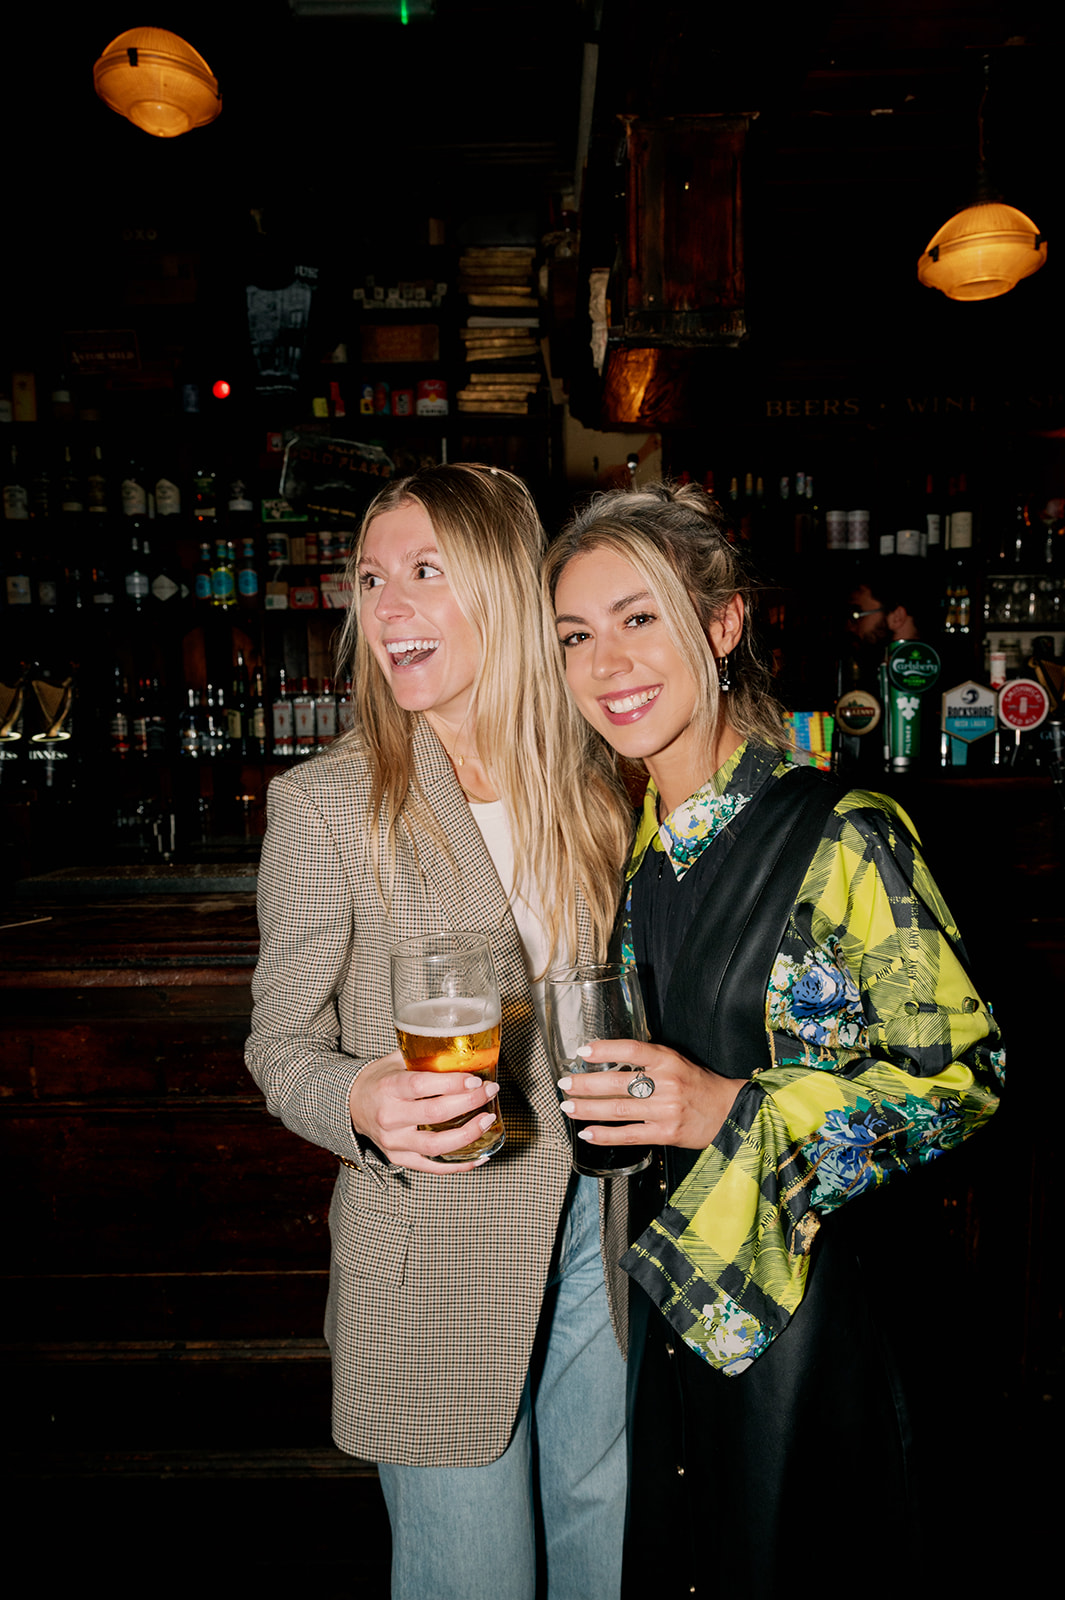 Two women holding glasses of beer at a welcome party at the Temple Bar pub in Dublin, Ireland.